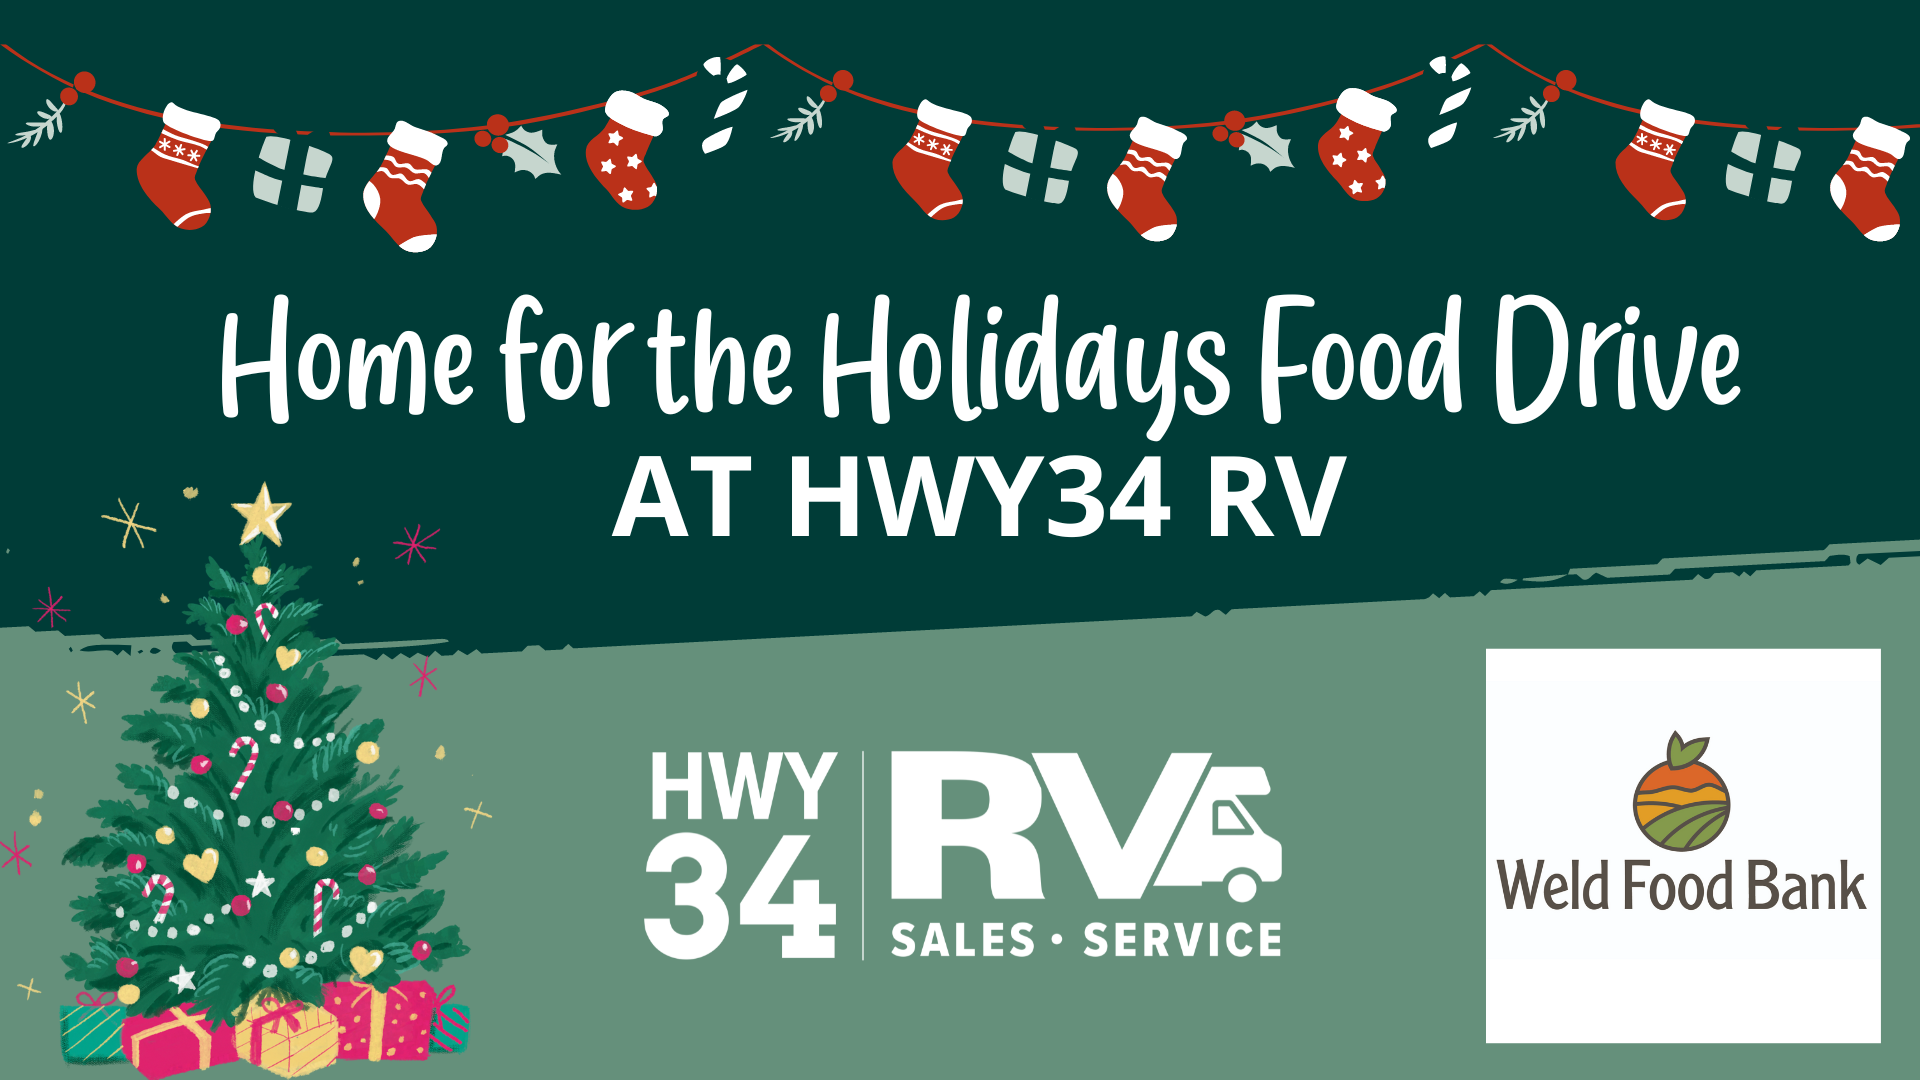 food drive at hwy34 rv with weld food bank